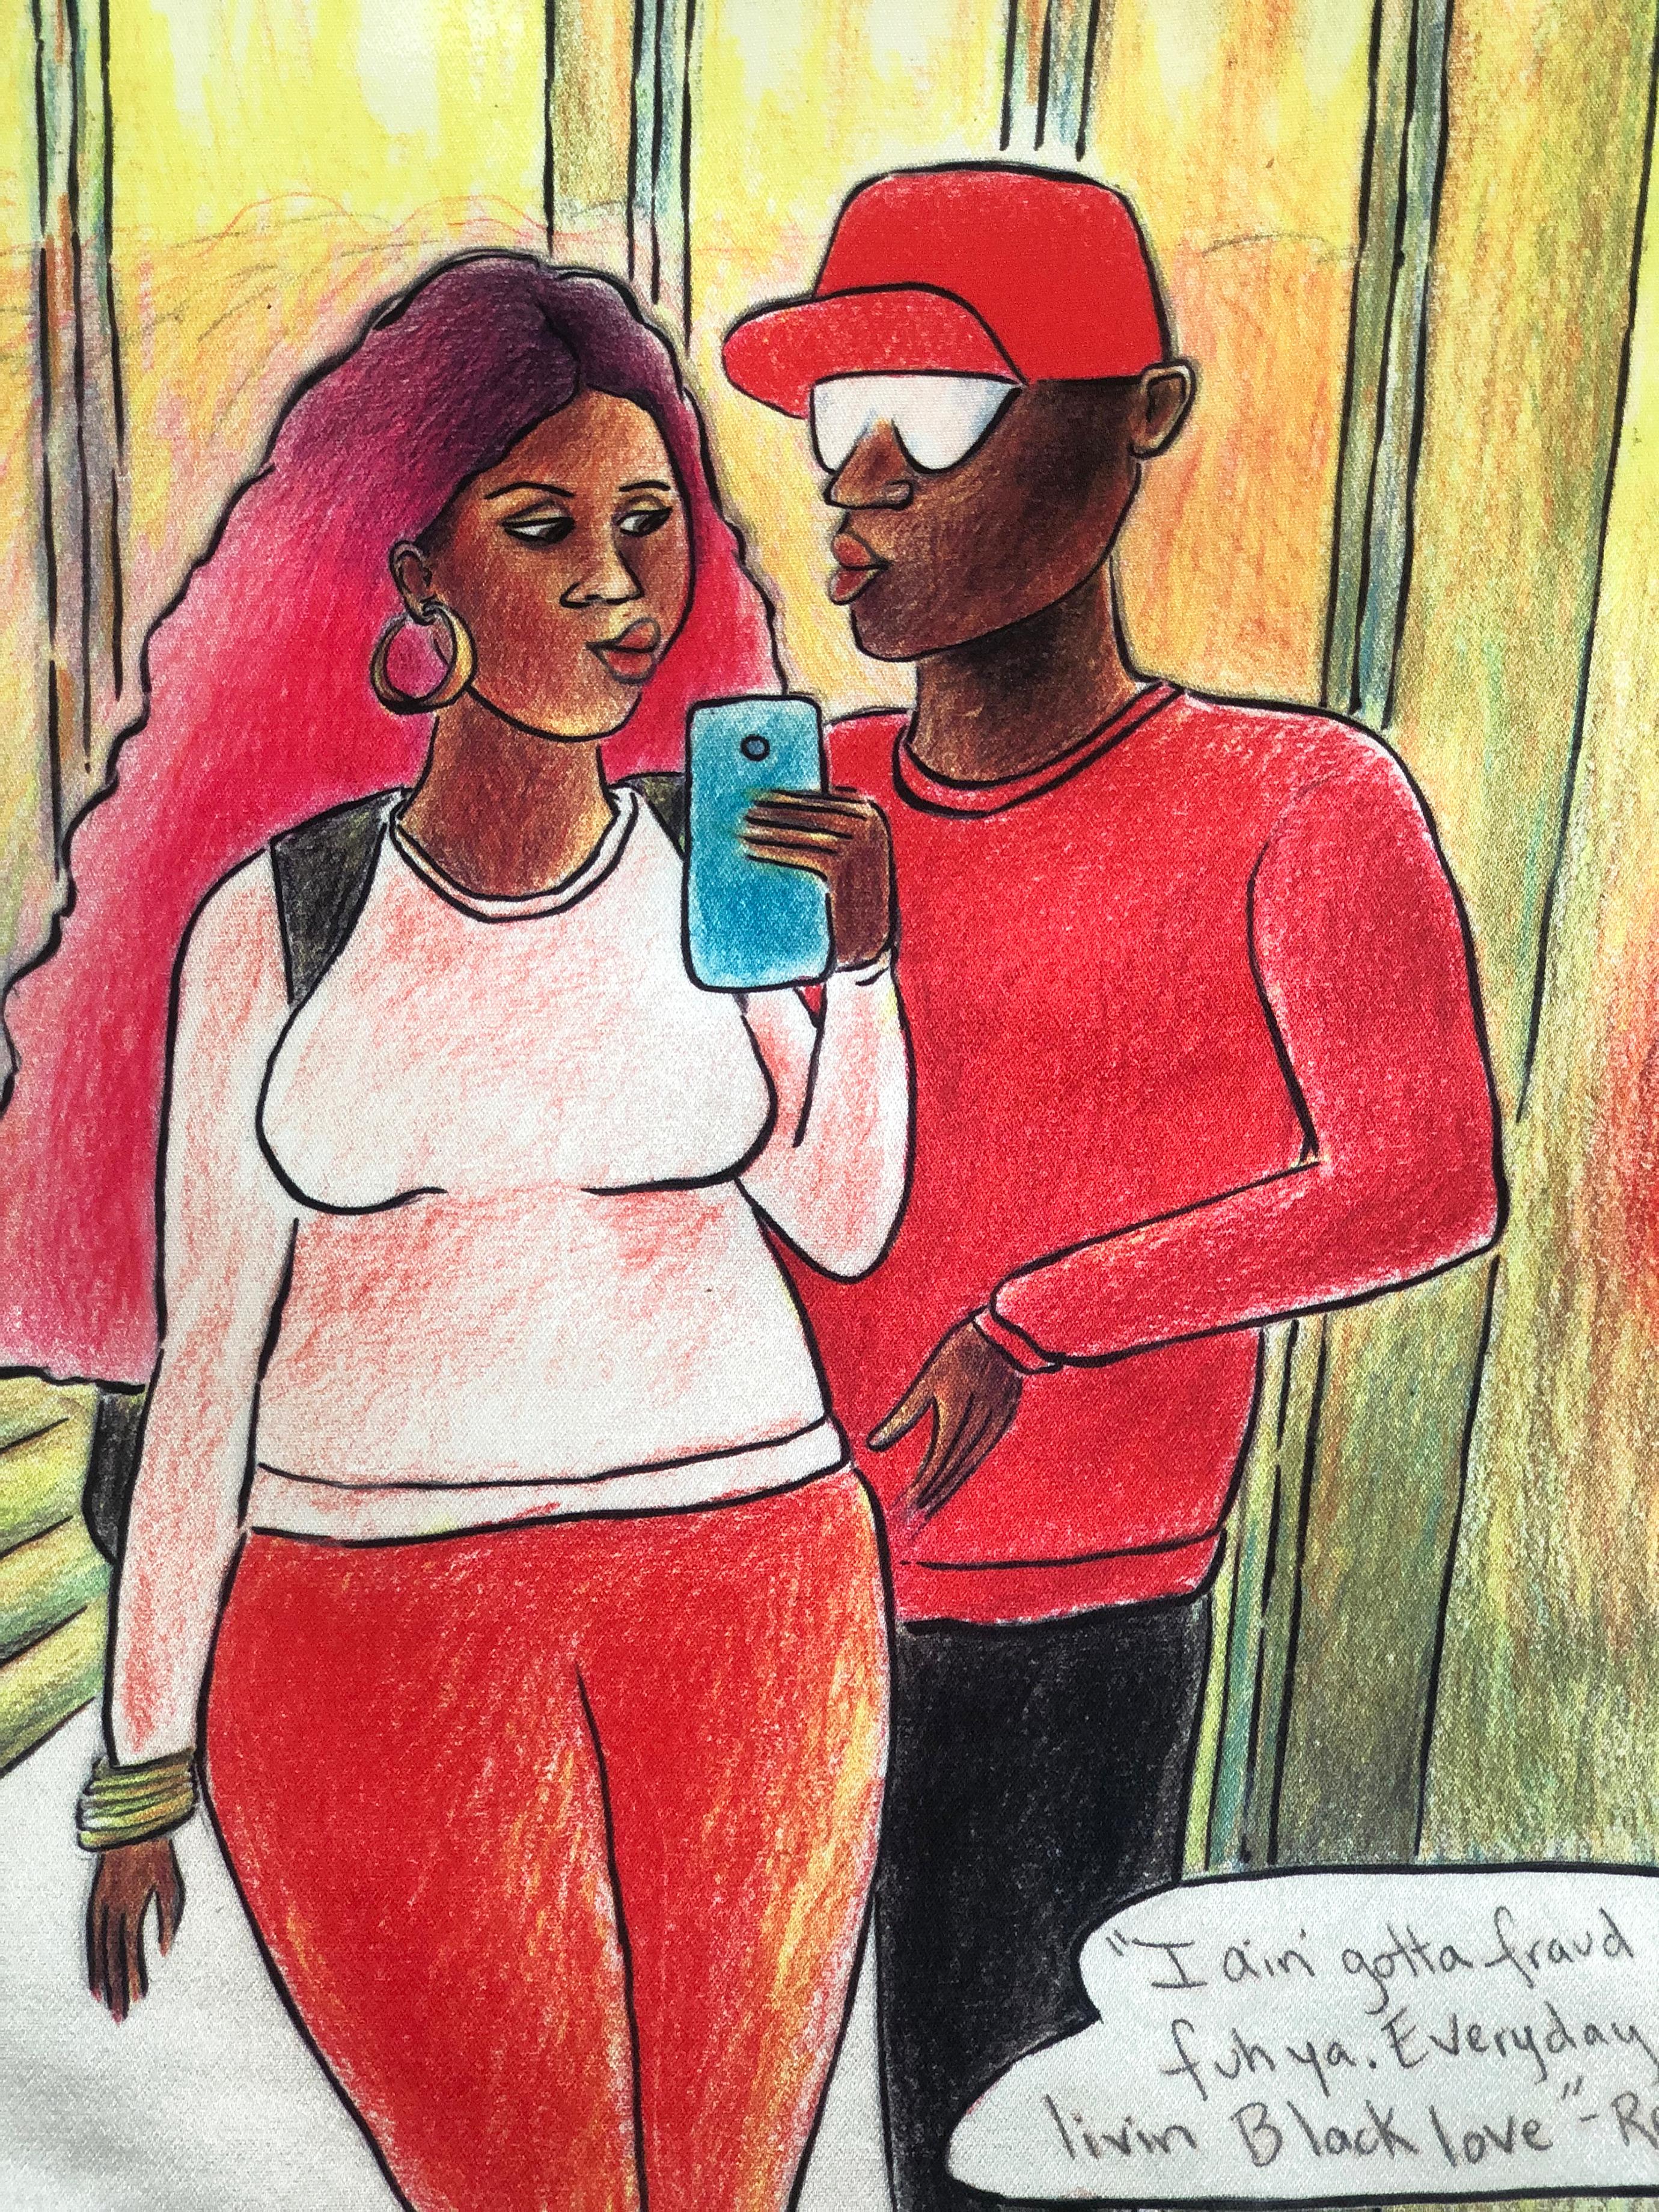 "The Rapper With The Pink Hair" colored pencils on archival paper